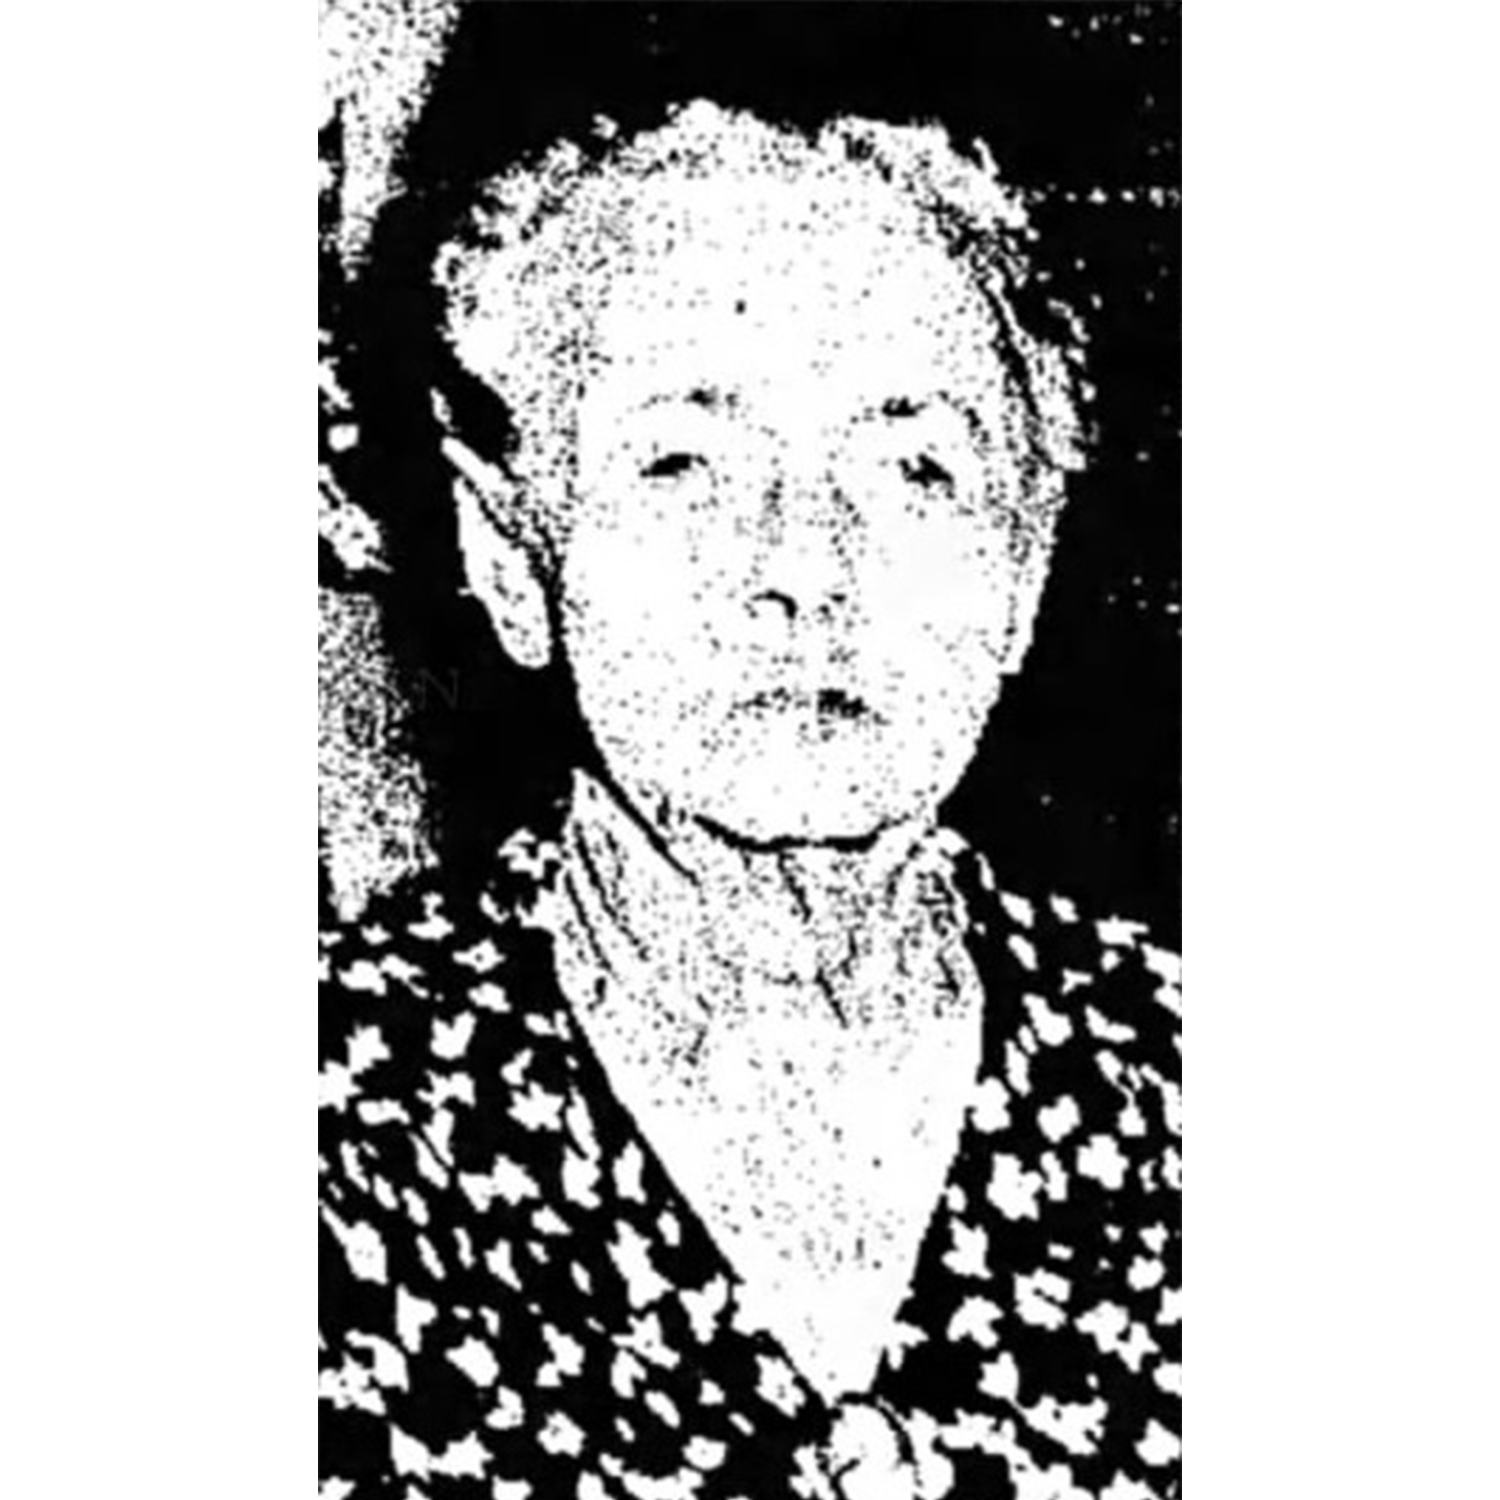 In 1950, at the age of 102. (Source: The Courier News)